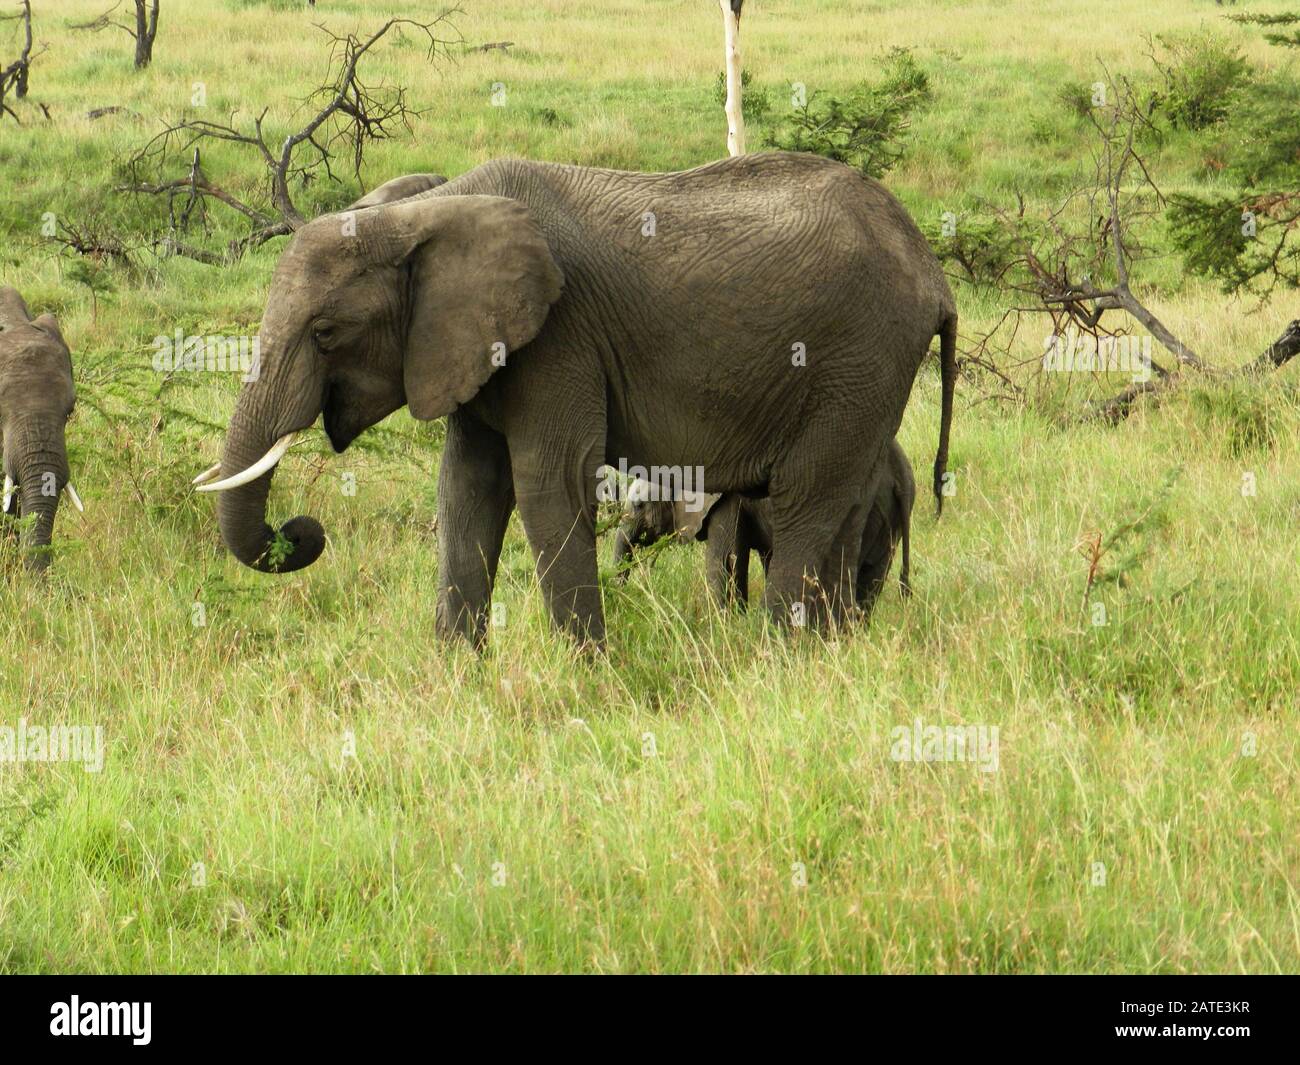 A group of elephants in the beautiful African savannah Stock Photo